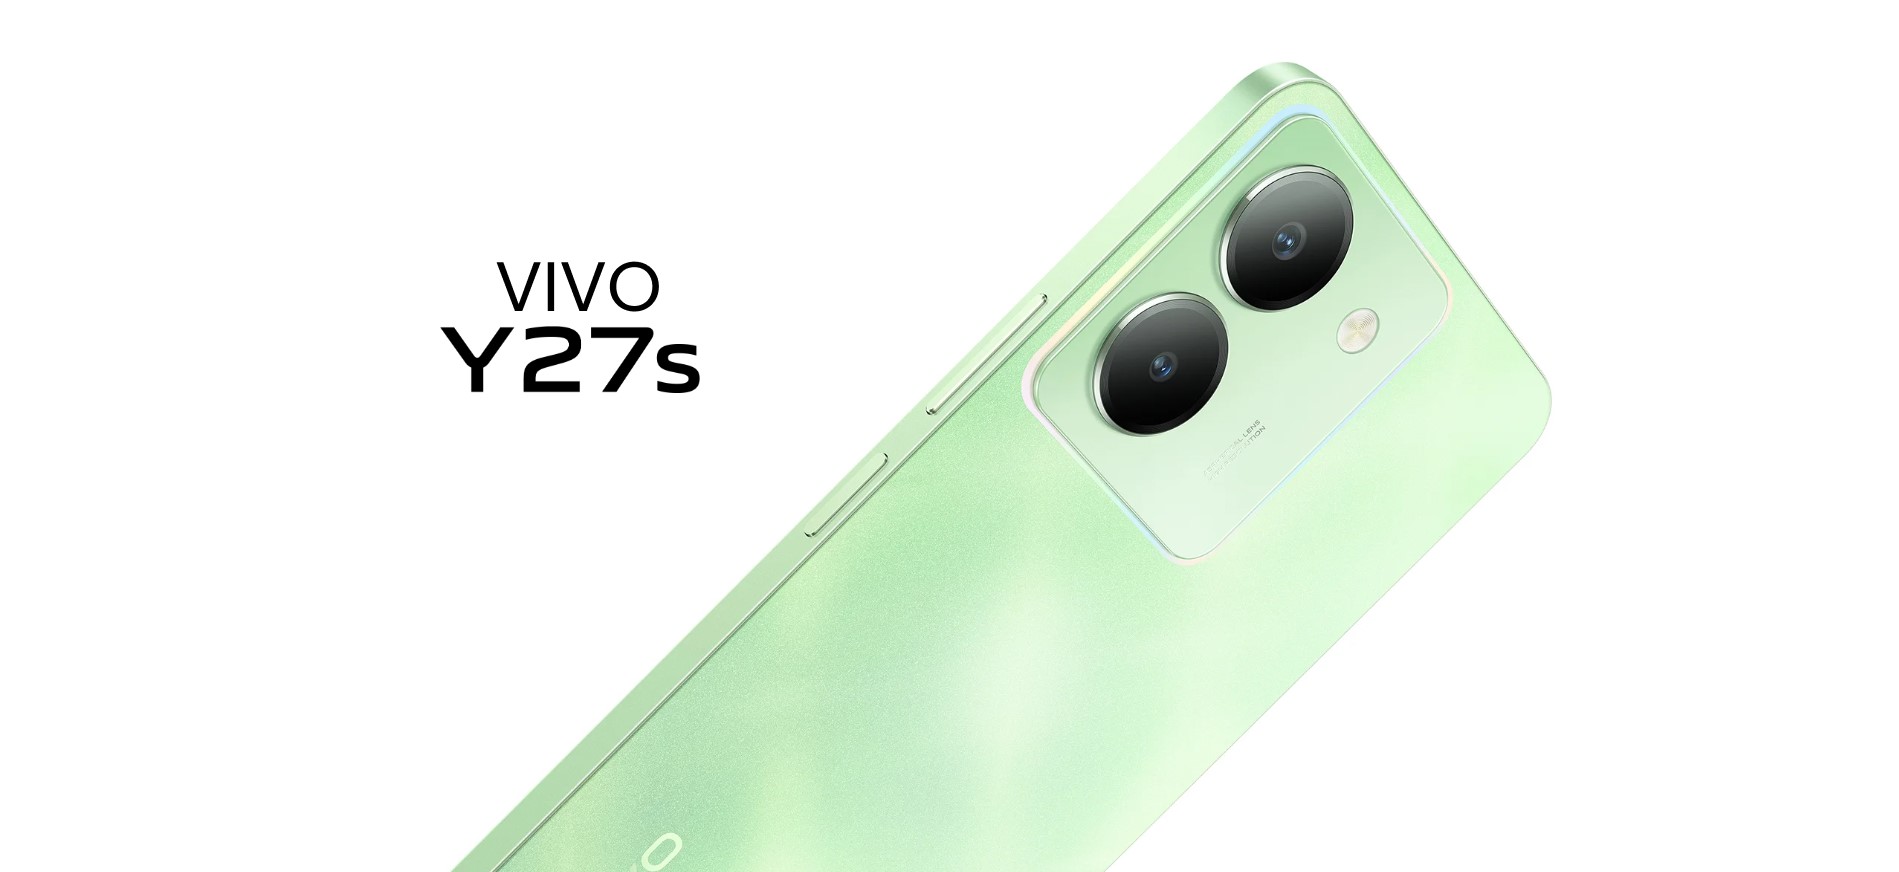 Vivo Y27s: Budget offering that comes with sleek design and powerful features